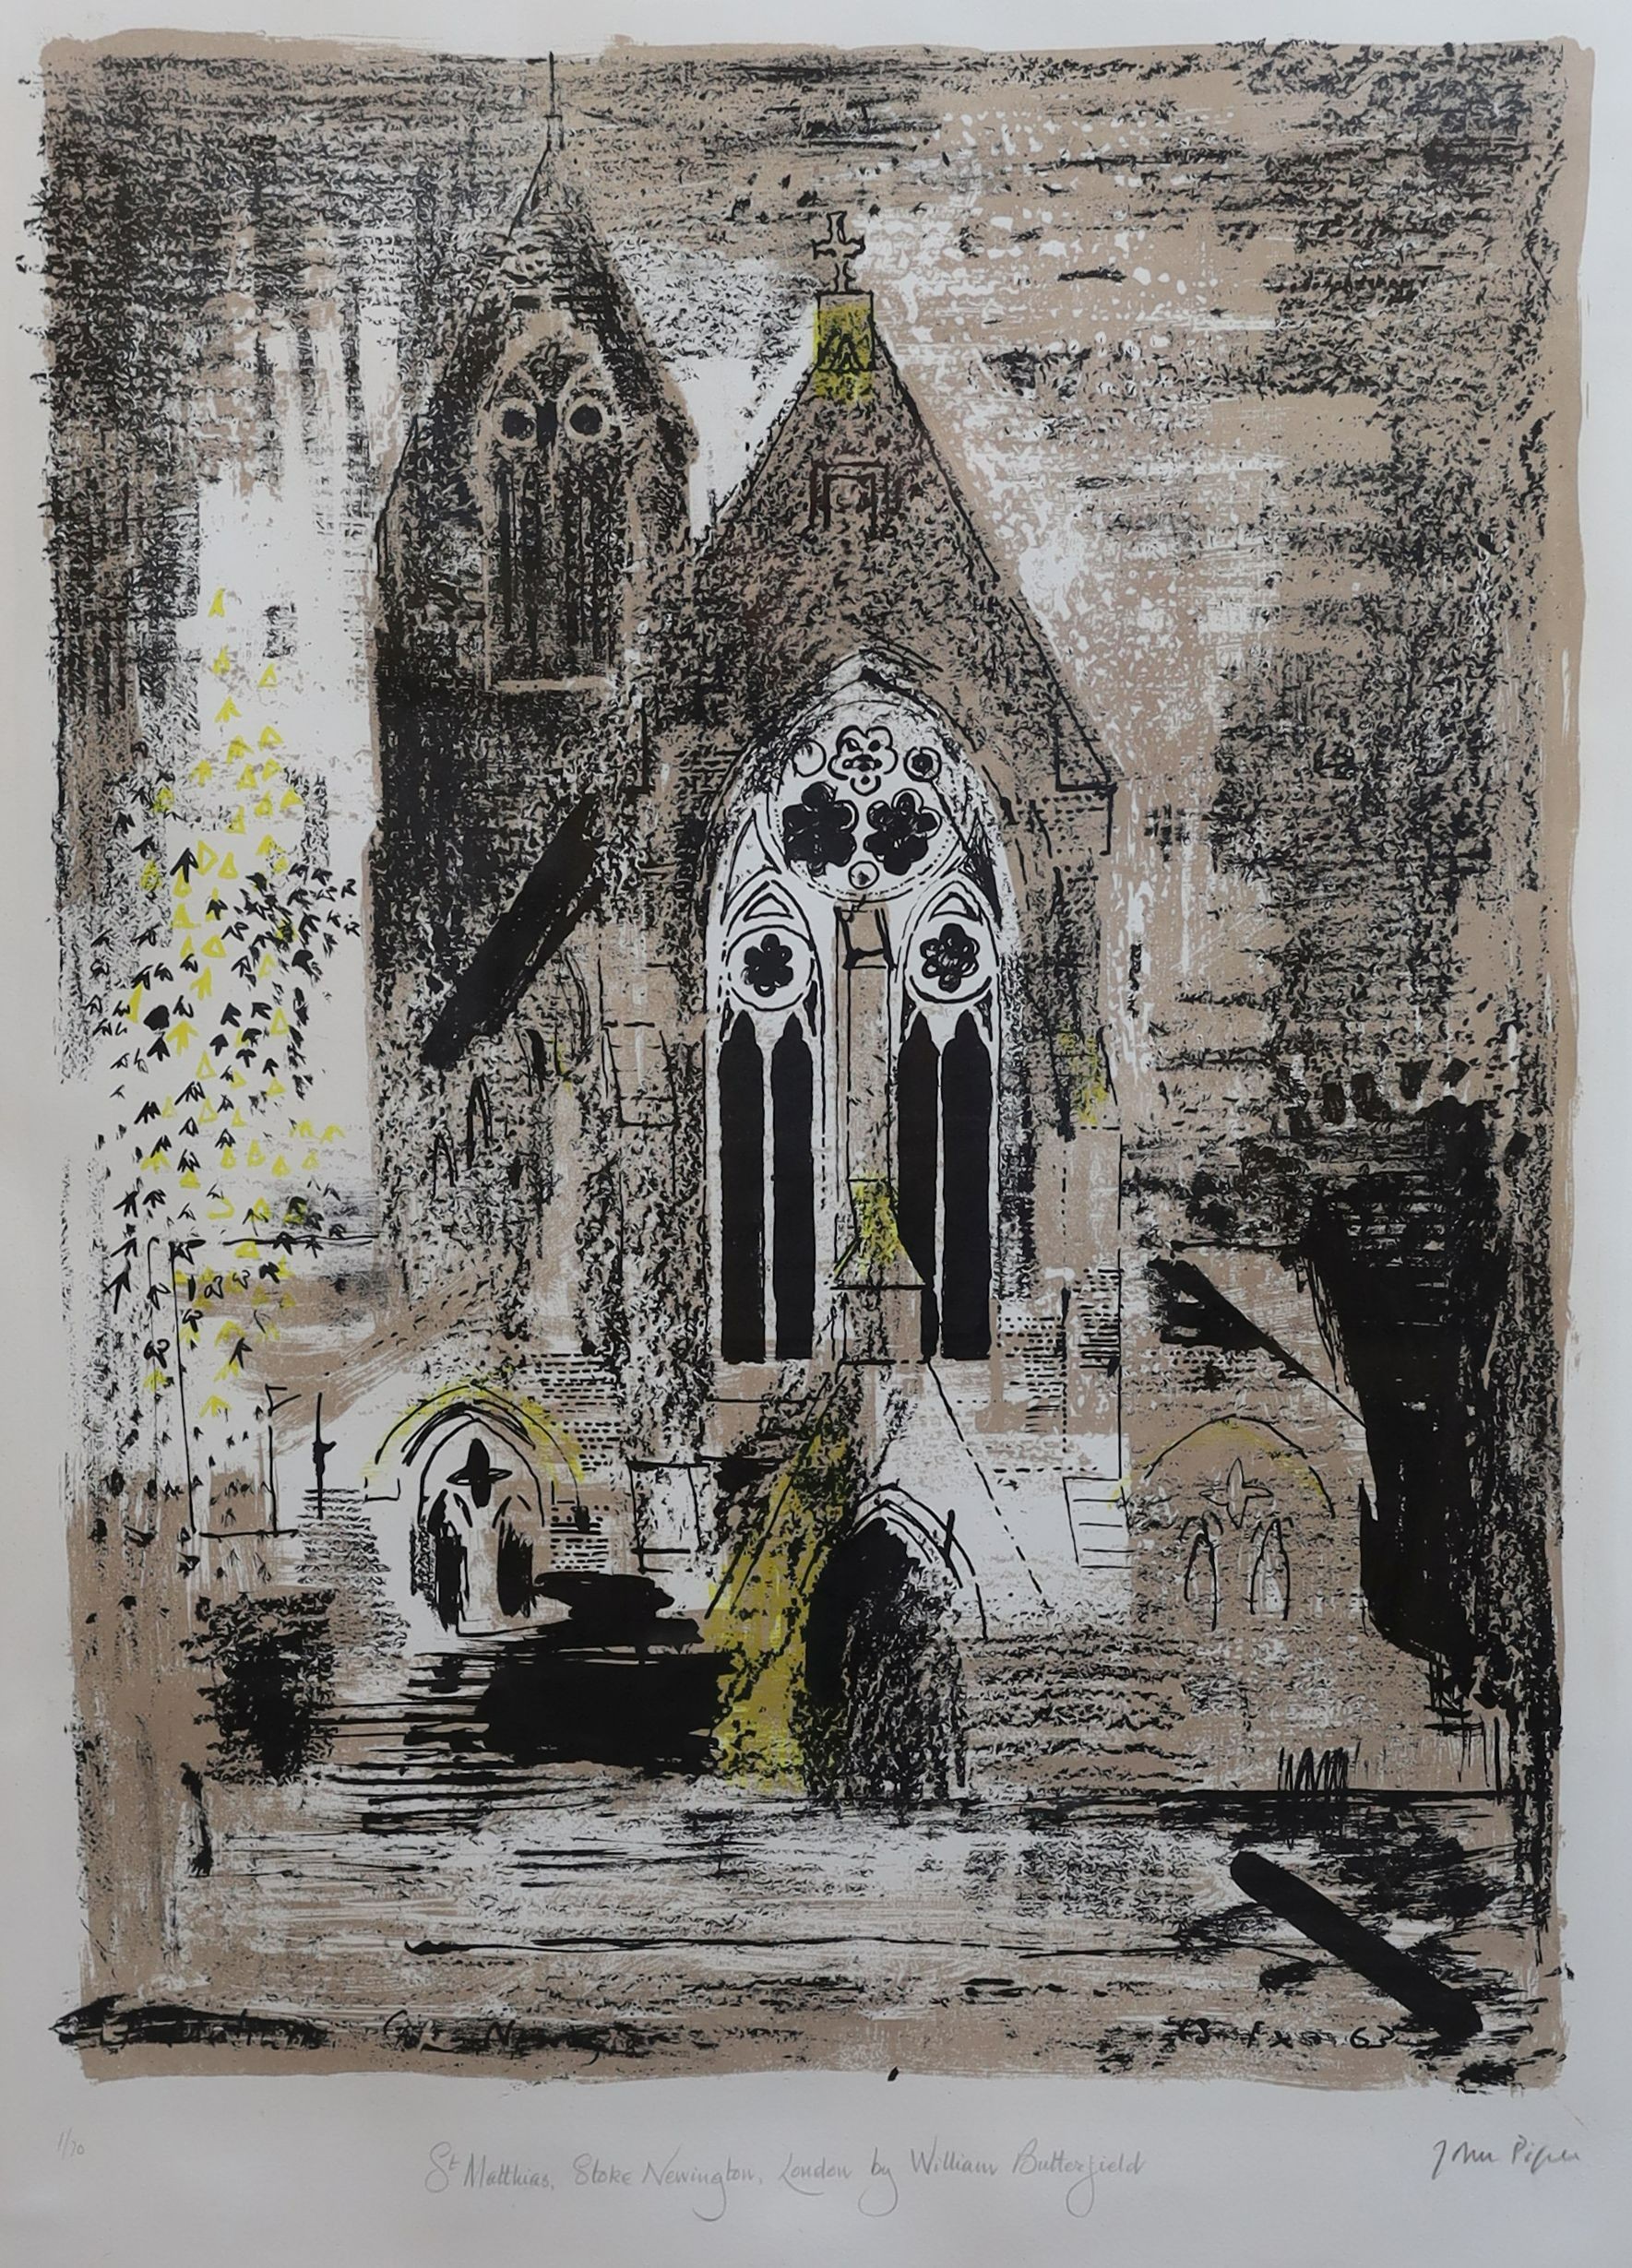 John Piper (1903-1992), St Matthias, Stoke Newington, London by William Butterfield (L 143), lithograph in colours on Barcham Green wove, 78 x 56cm                                                                         